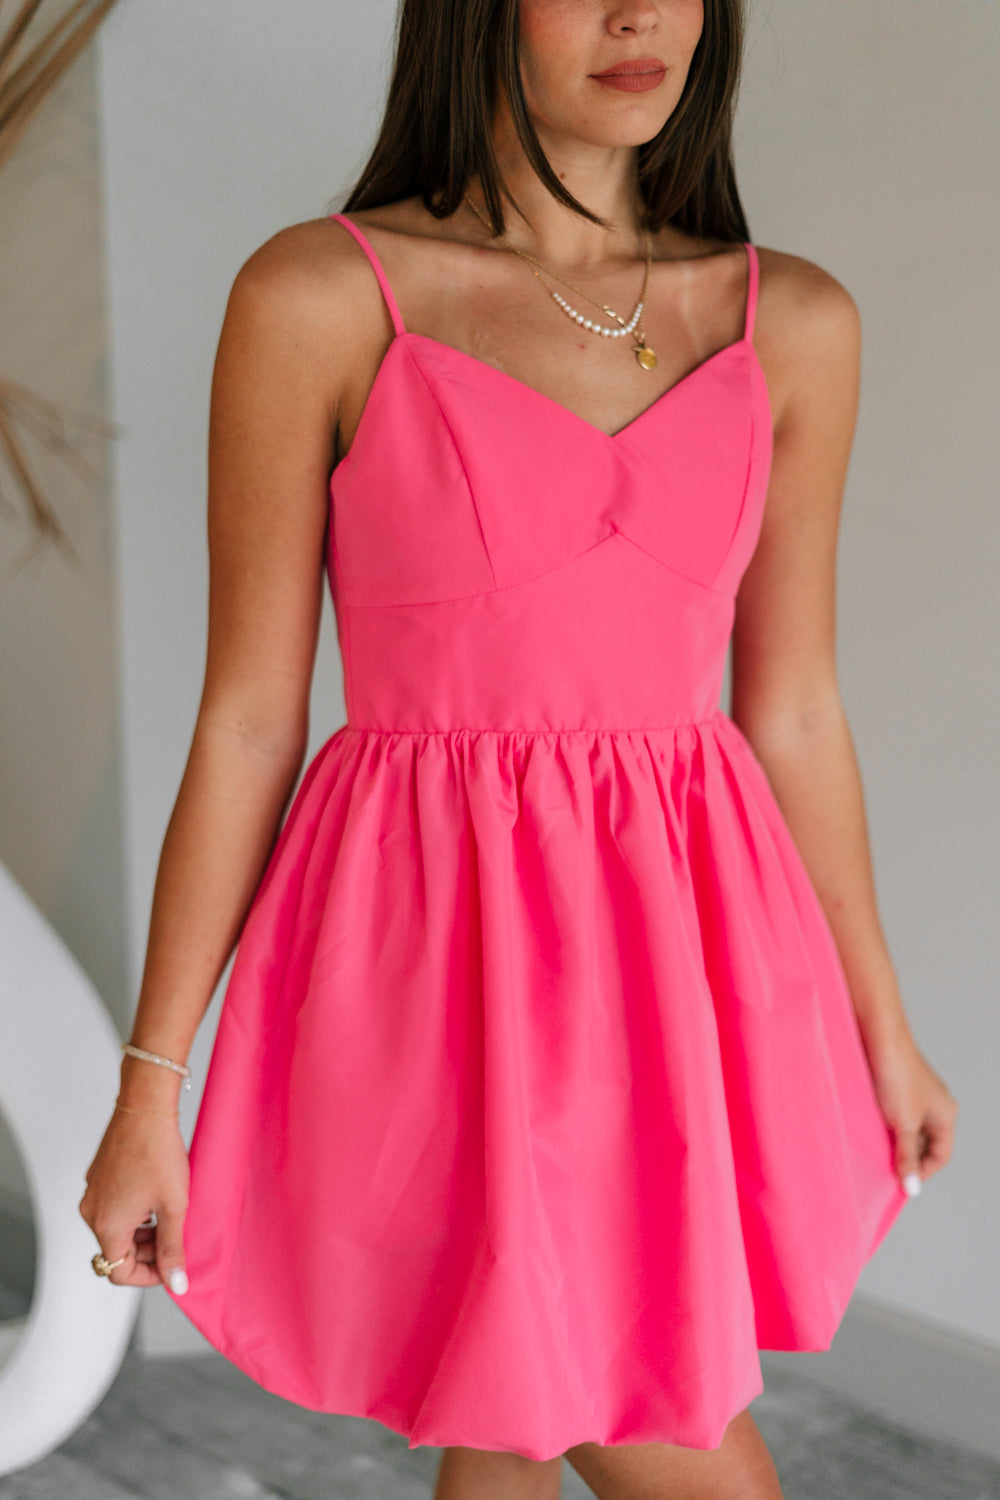 Close up view of female model wearing the Camila Sleeveless Bubble Mini Dress in PInk which features Lightweight Fabric, Mini Length with Bubble Hem, Two Side Slit Pockets, Sweetheart Neckline, Adjustable Straps and Smocked Back